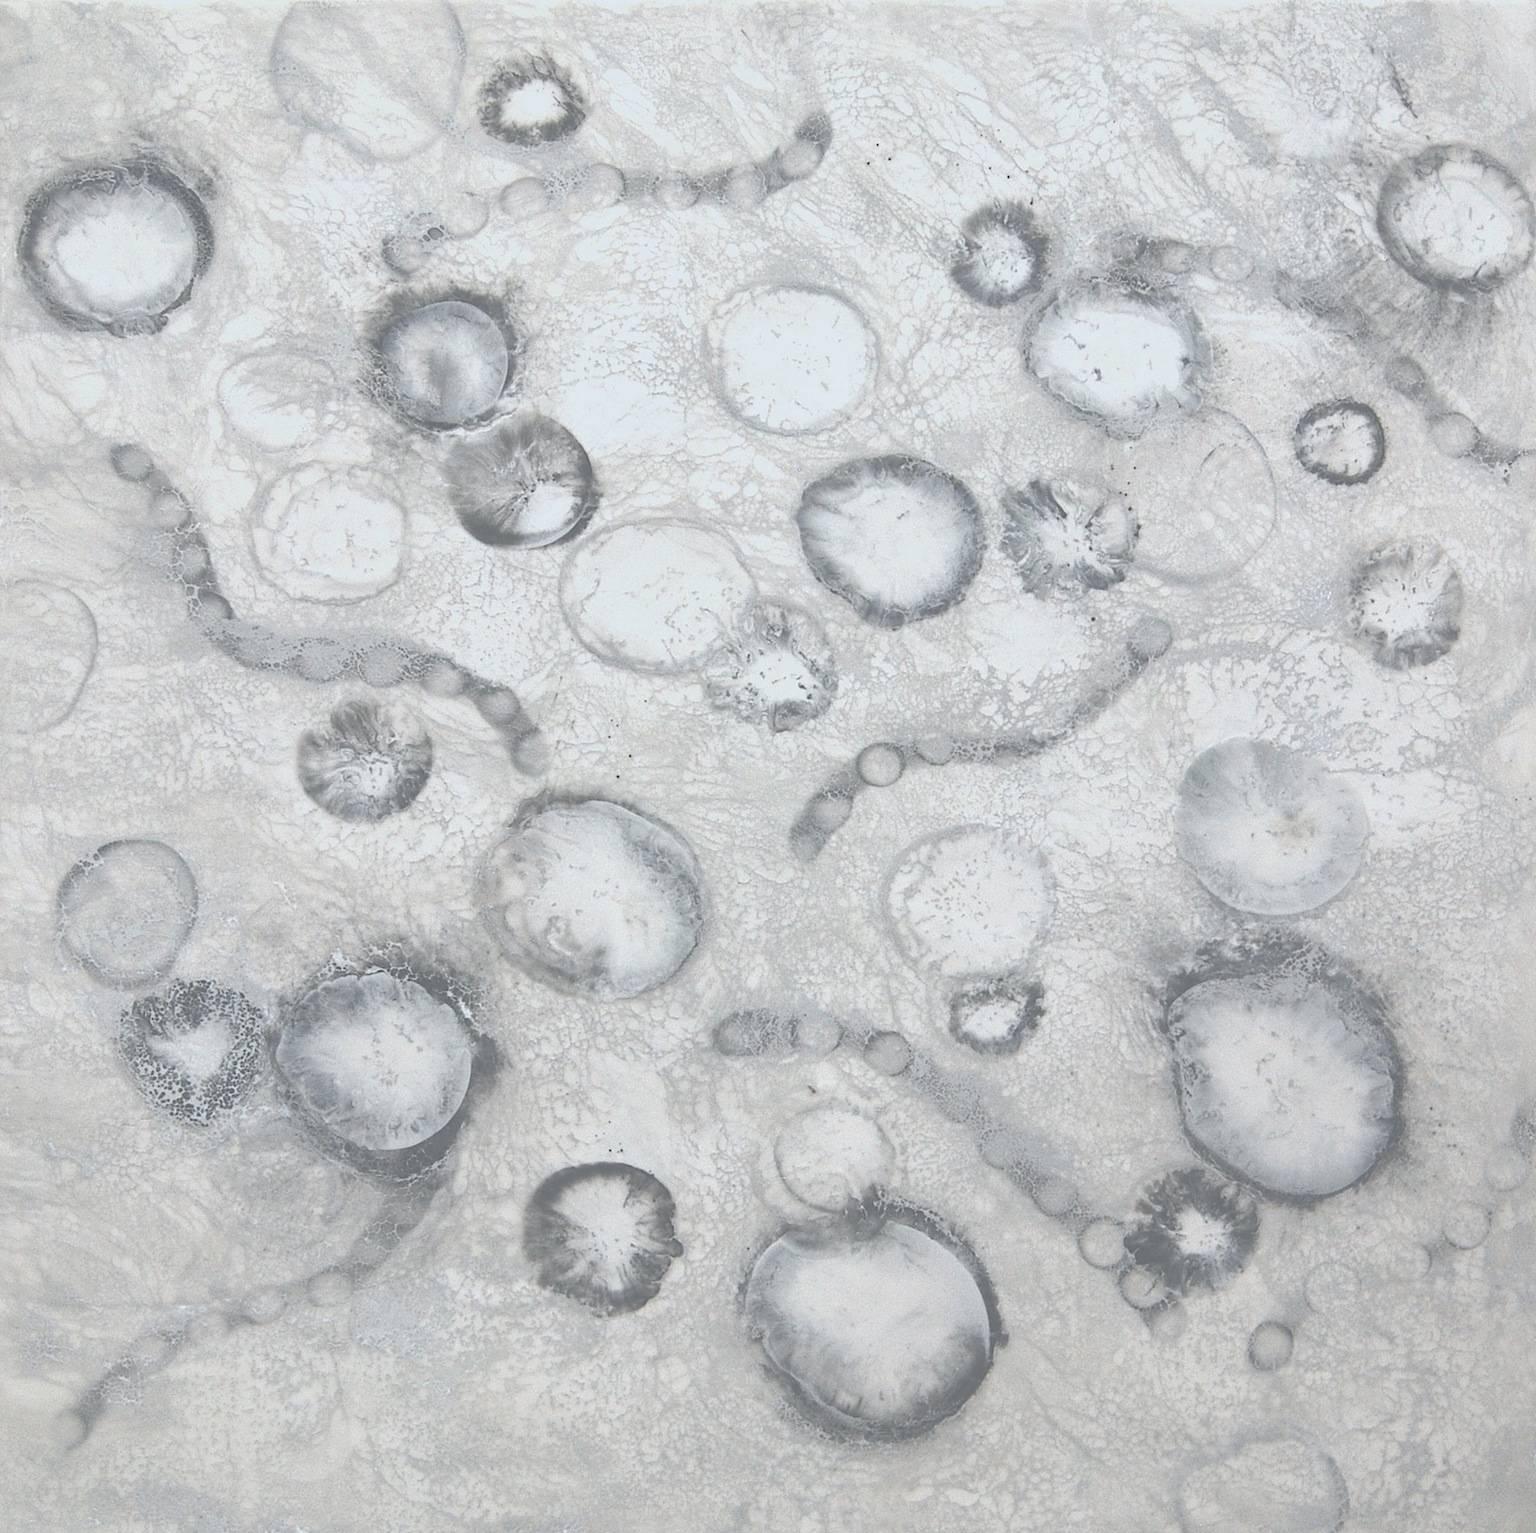 "Dispersion 3", abstract, microscopic, gray, white, black, encaustic - Mixed Media Art by Kay Hartung